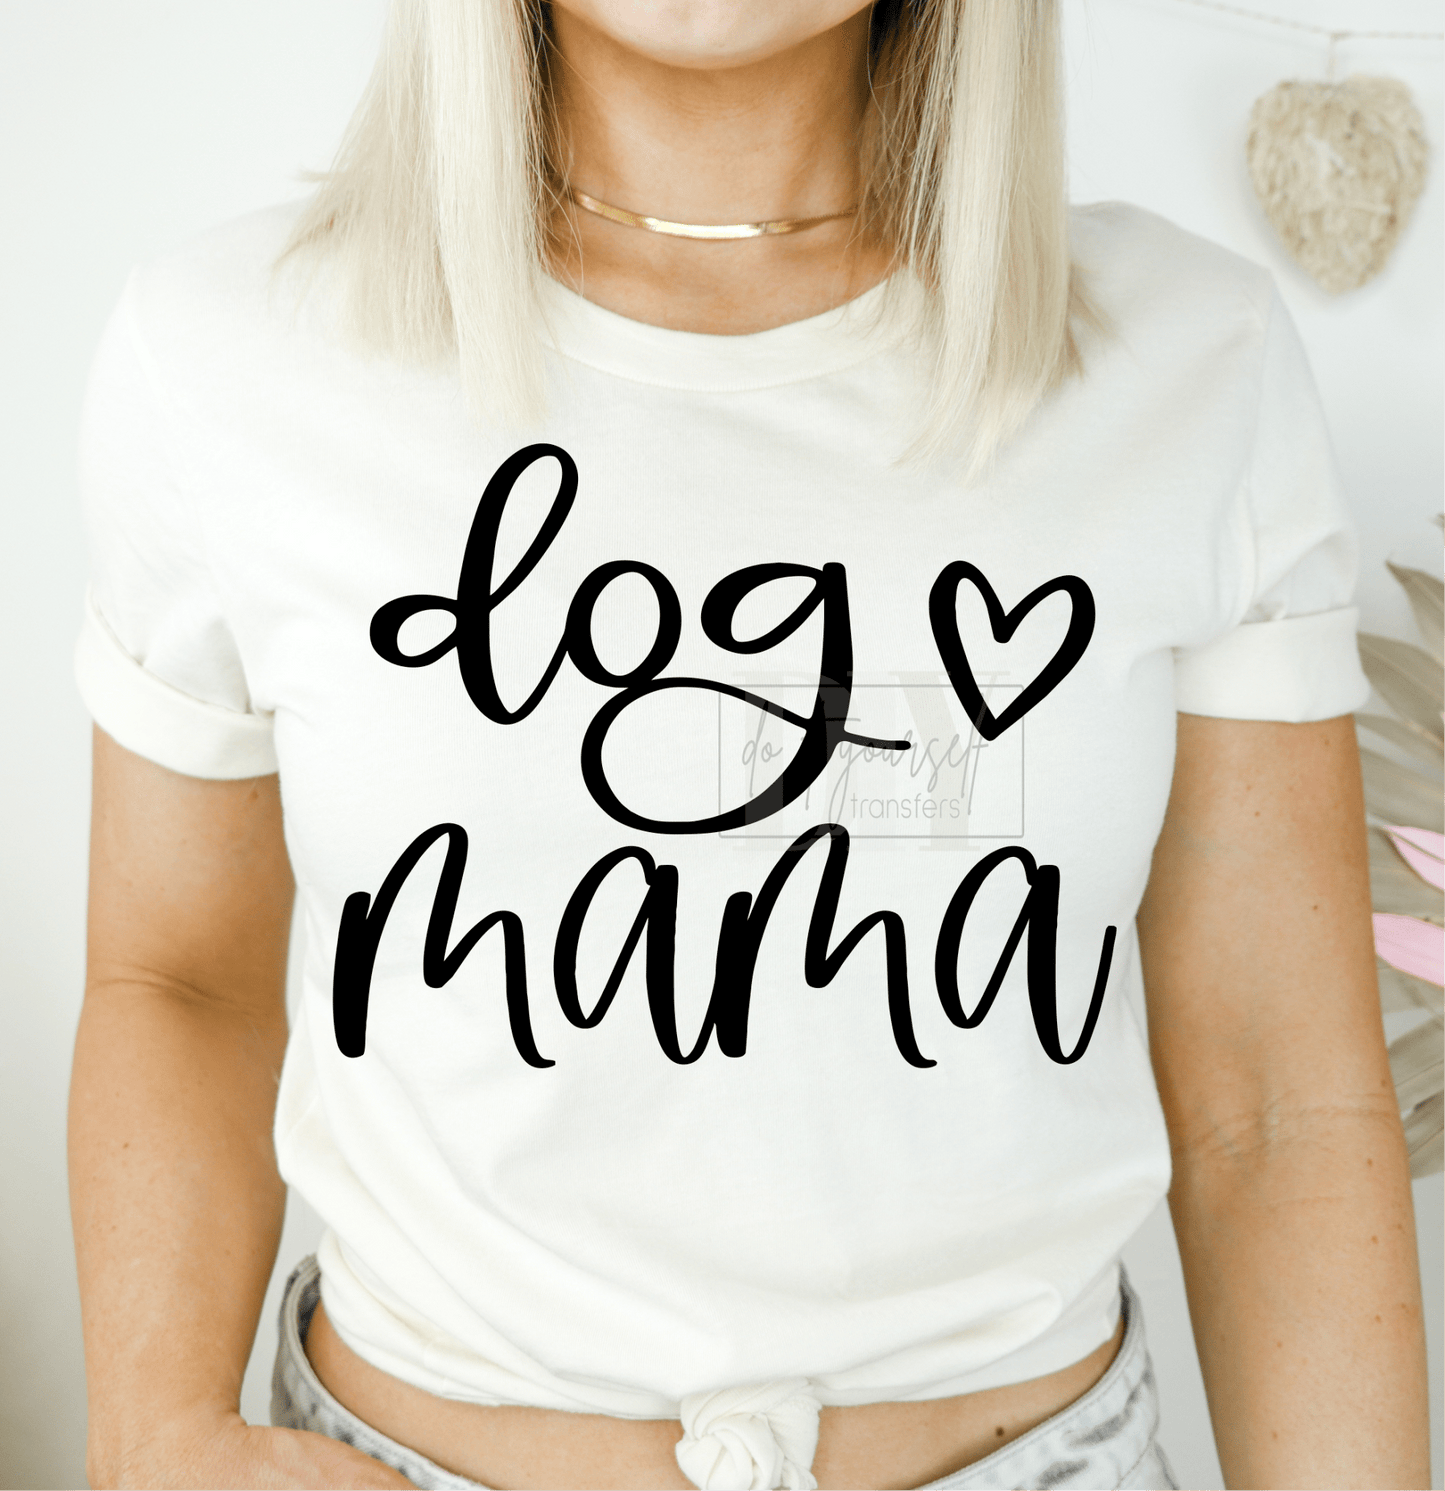 RTS DOG MAMA HEART SINGLE COLOR BLACK Screen Print transfers size ADULT 10X12 - Do it yourself Transfers